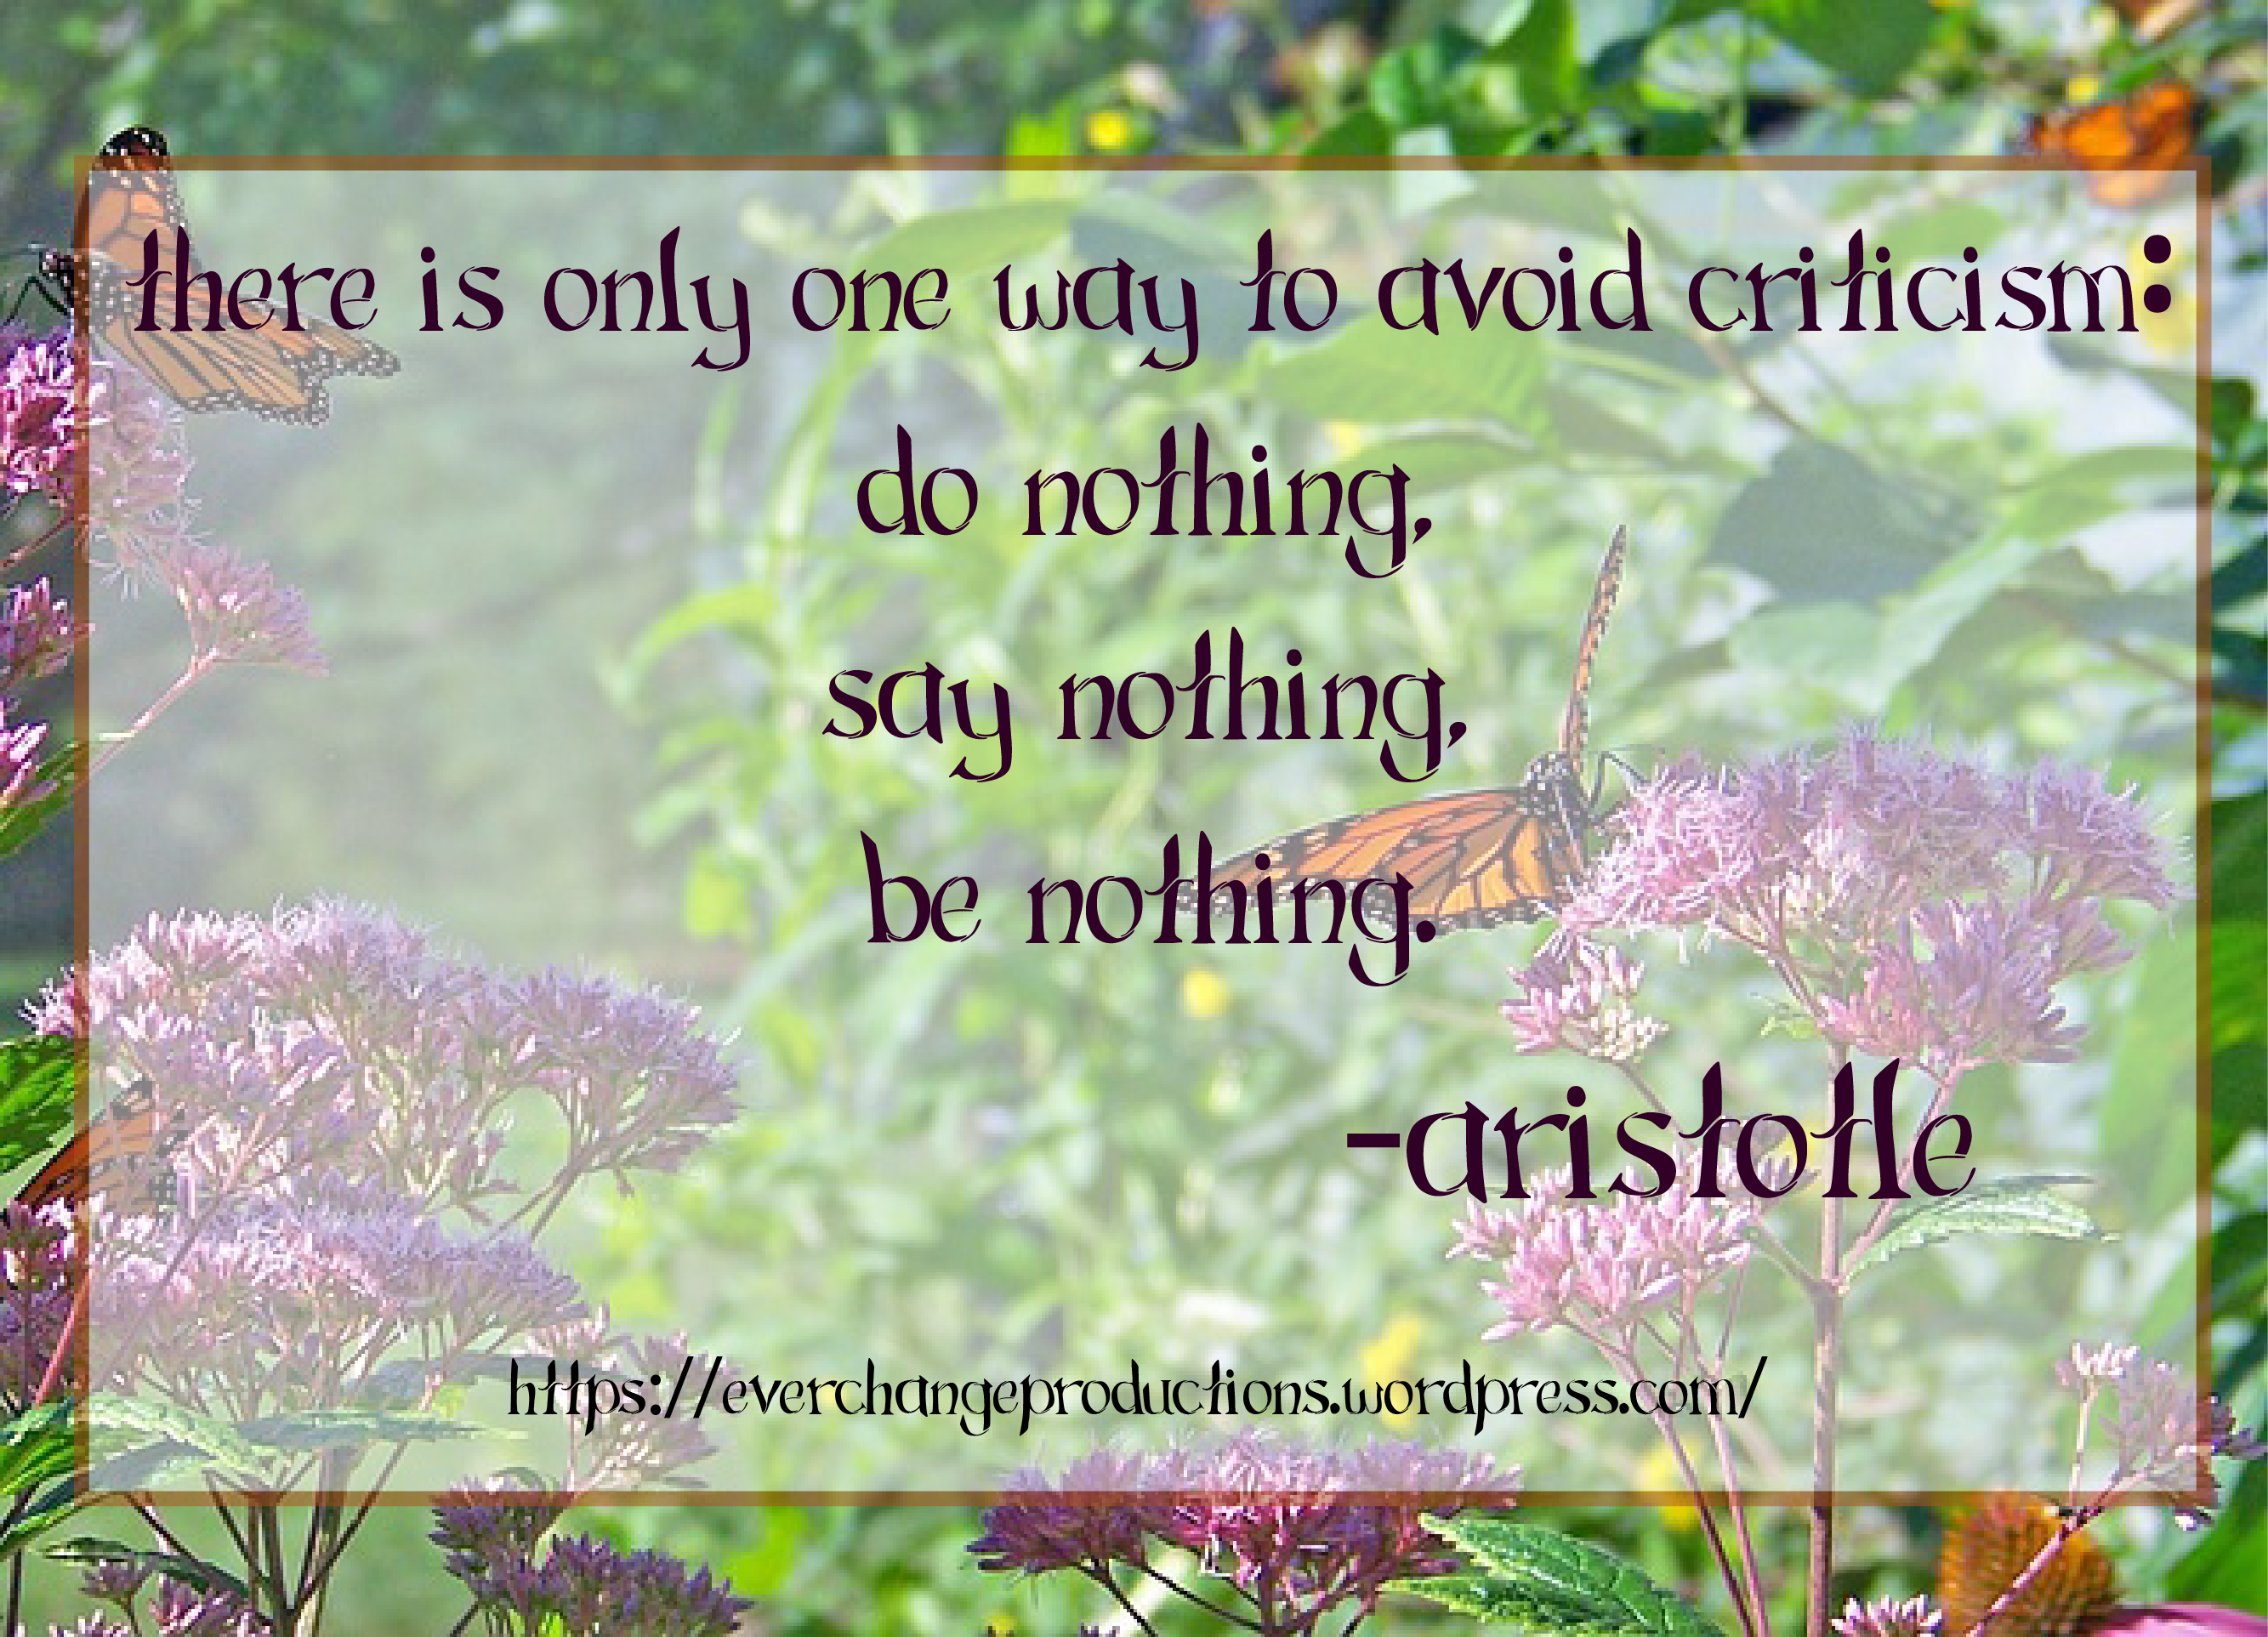 Do you need some motivation or encouragement to start your week? Just remember: "There is only one way to avoid criticism: do nothing, say nothing, be nothing." Aristotle.